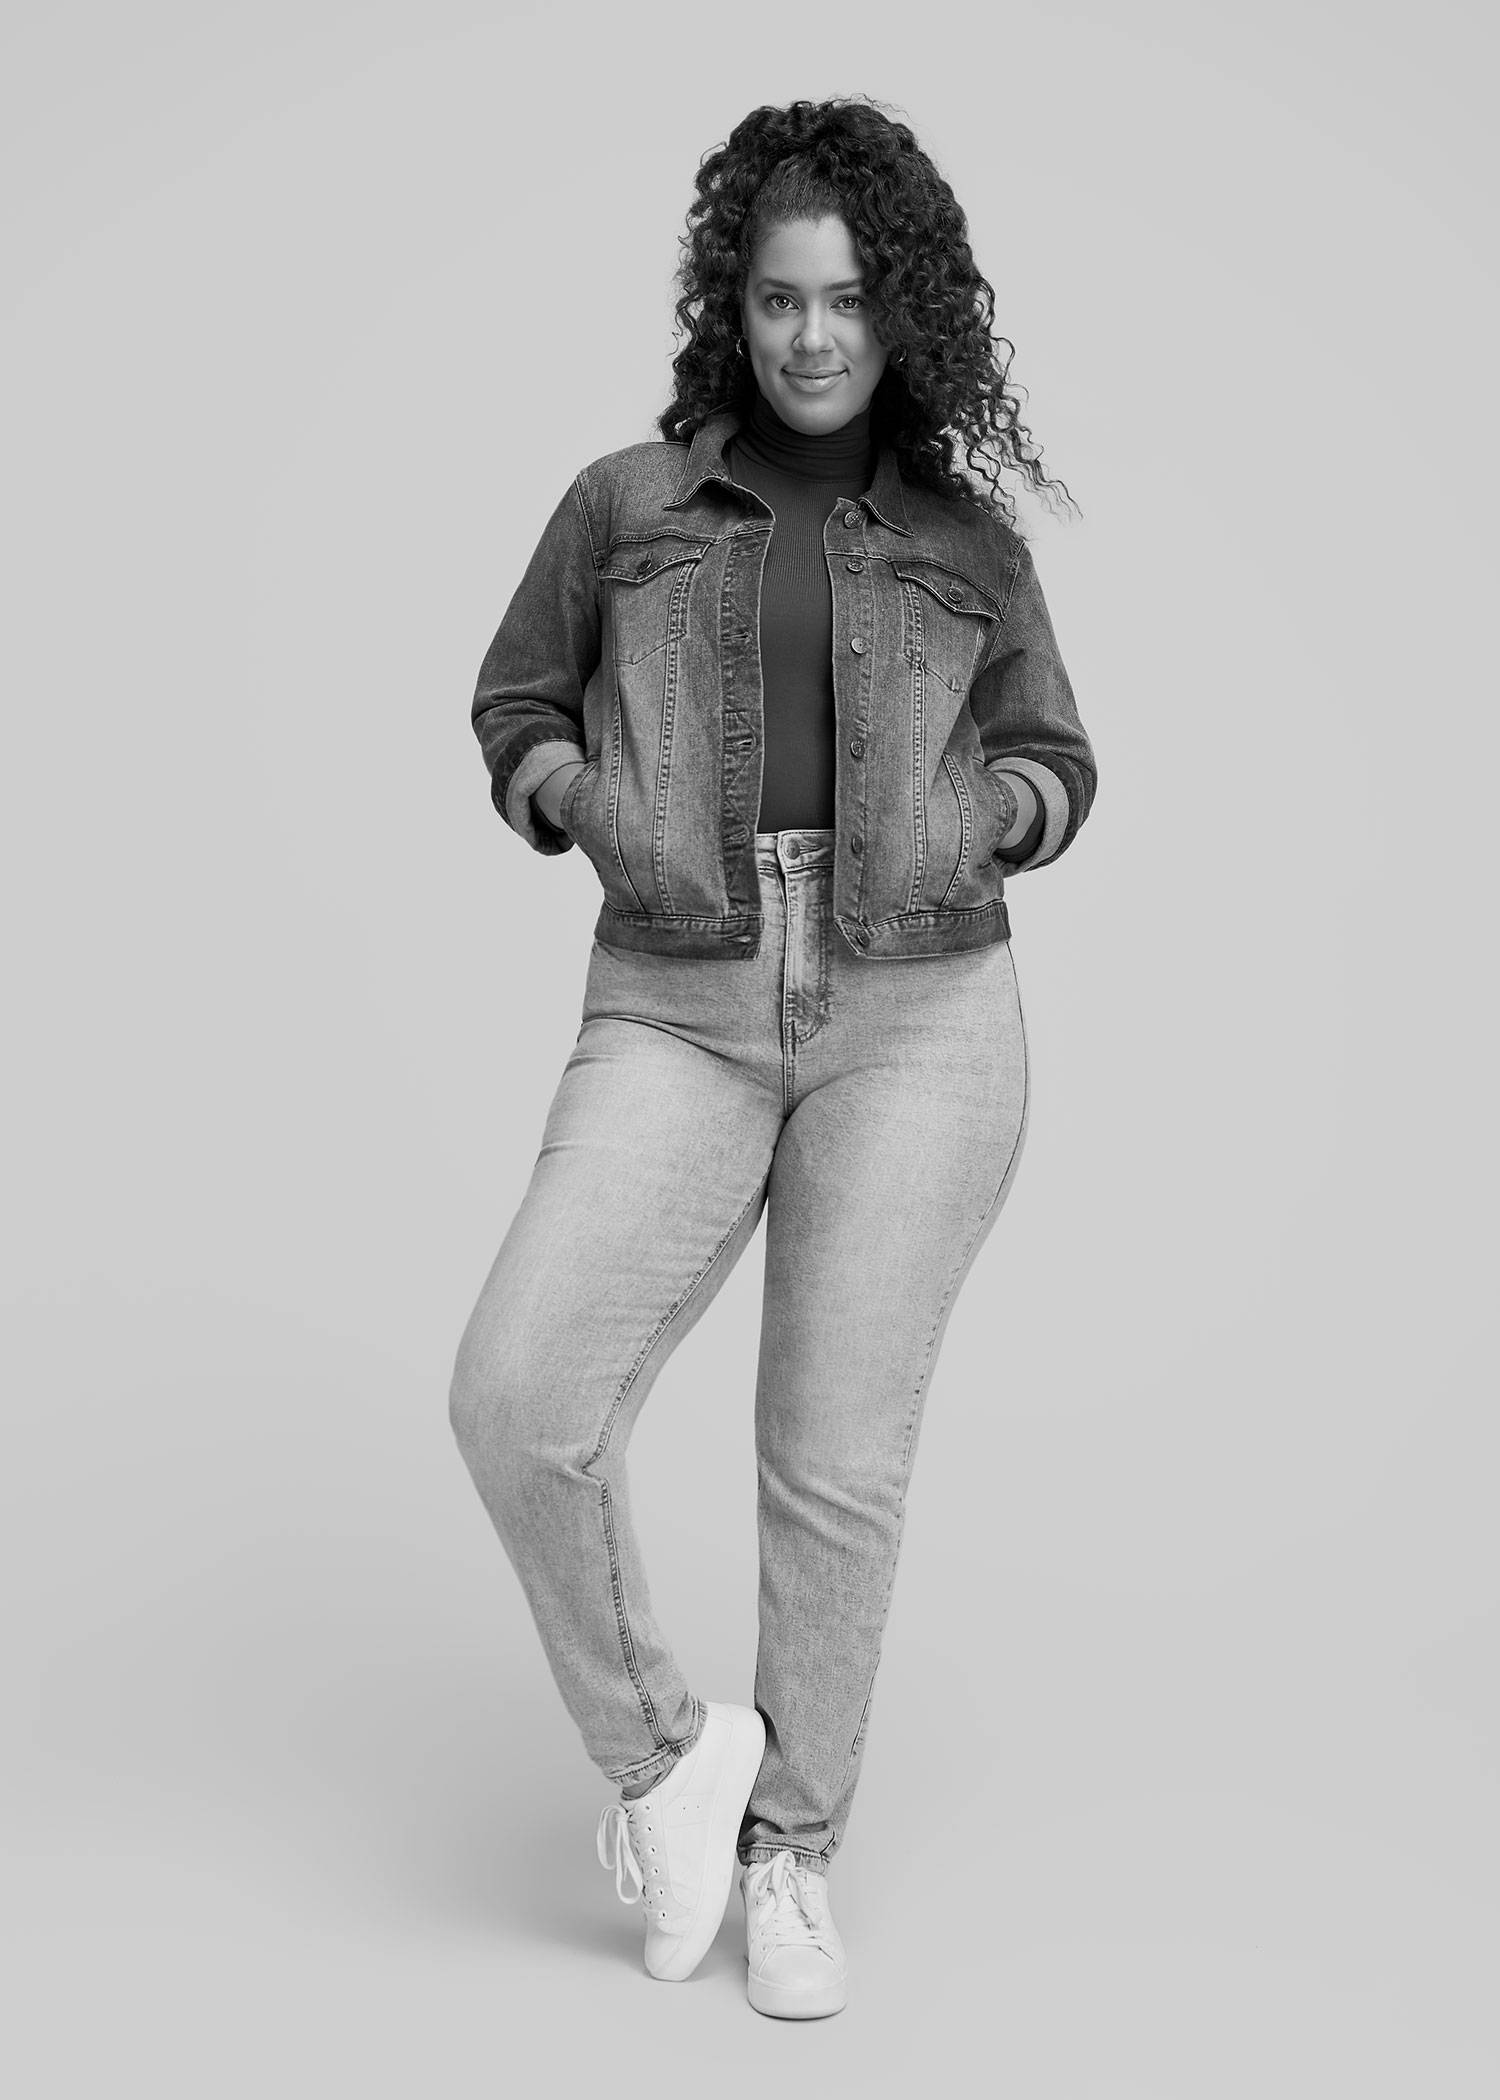 A tall woman wearing a denim jacket and light wash jeans